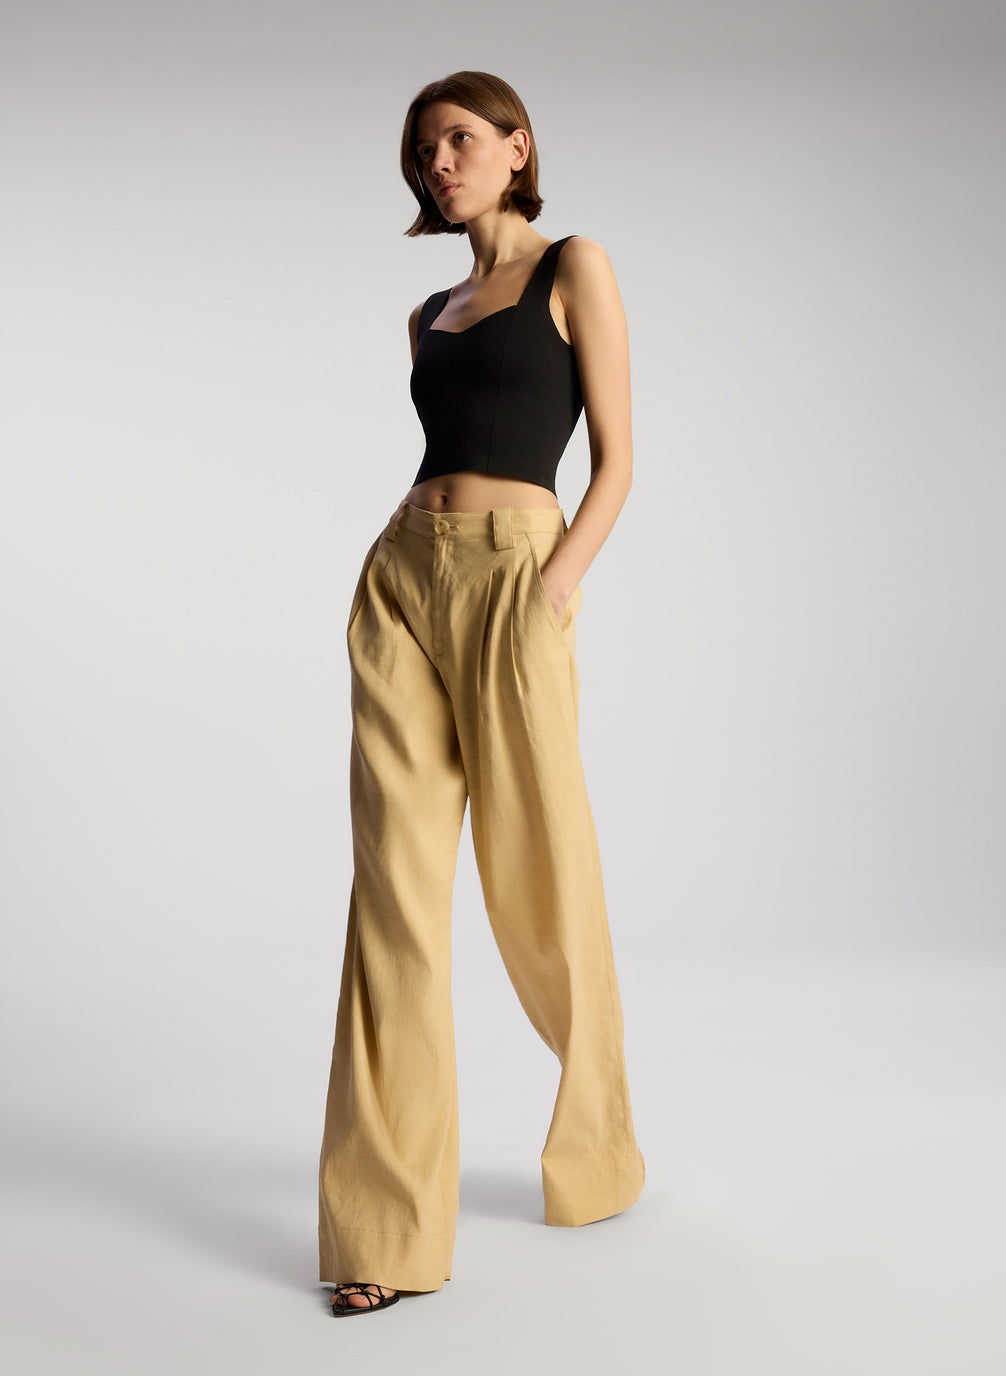 side view of woman wearing black sleeveless compact knit top and tan pants